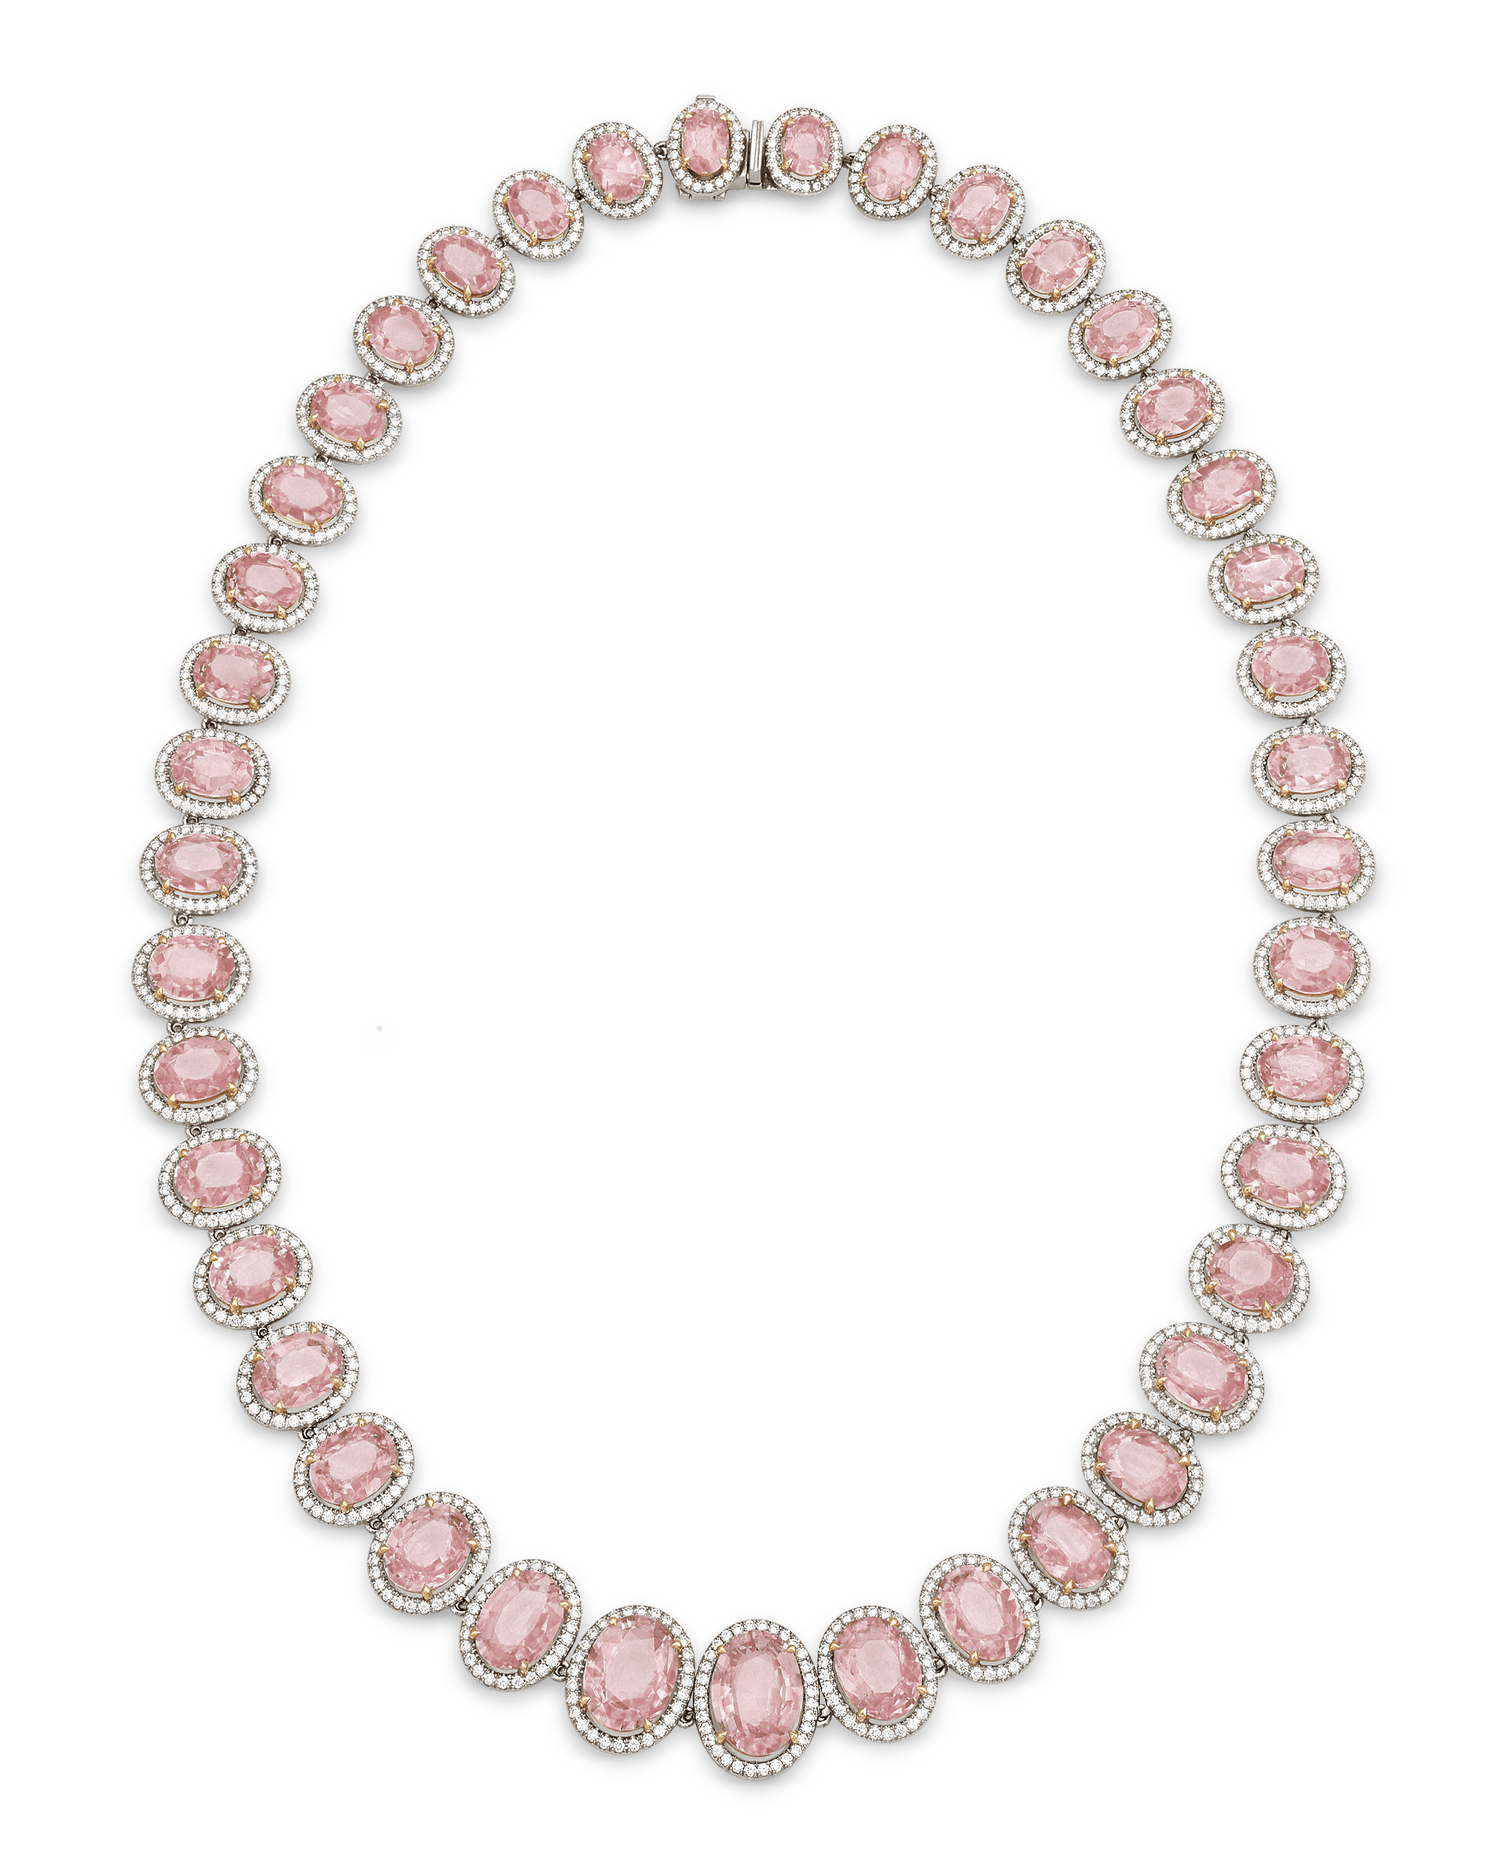 Padparadscha Sapphire Necklace, 58.31 Carats